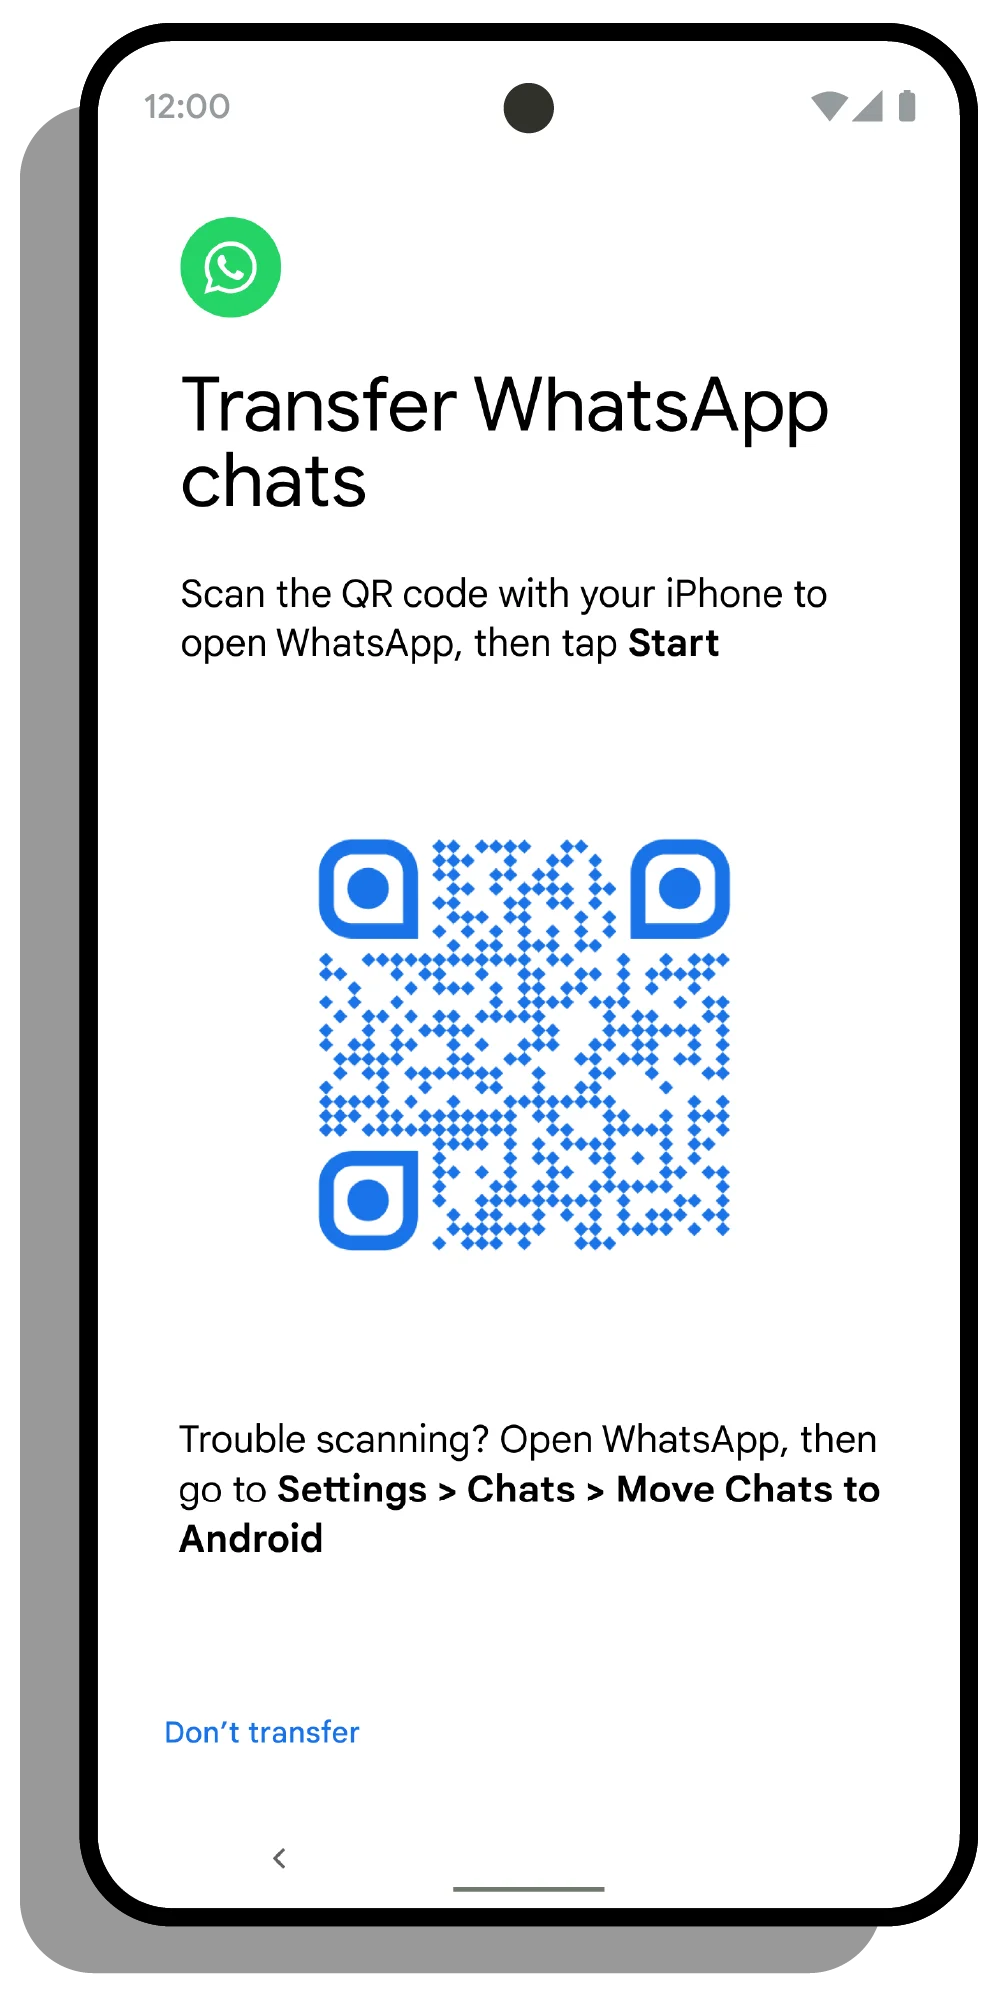 Scan the QR Code to Transfer WhatsApp Chats